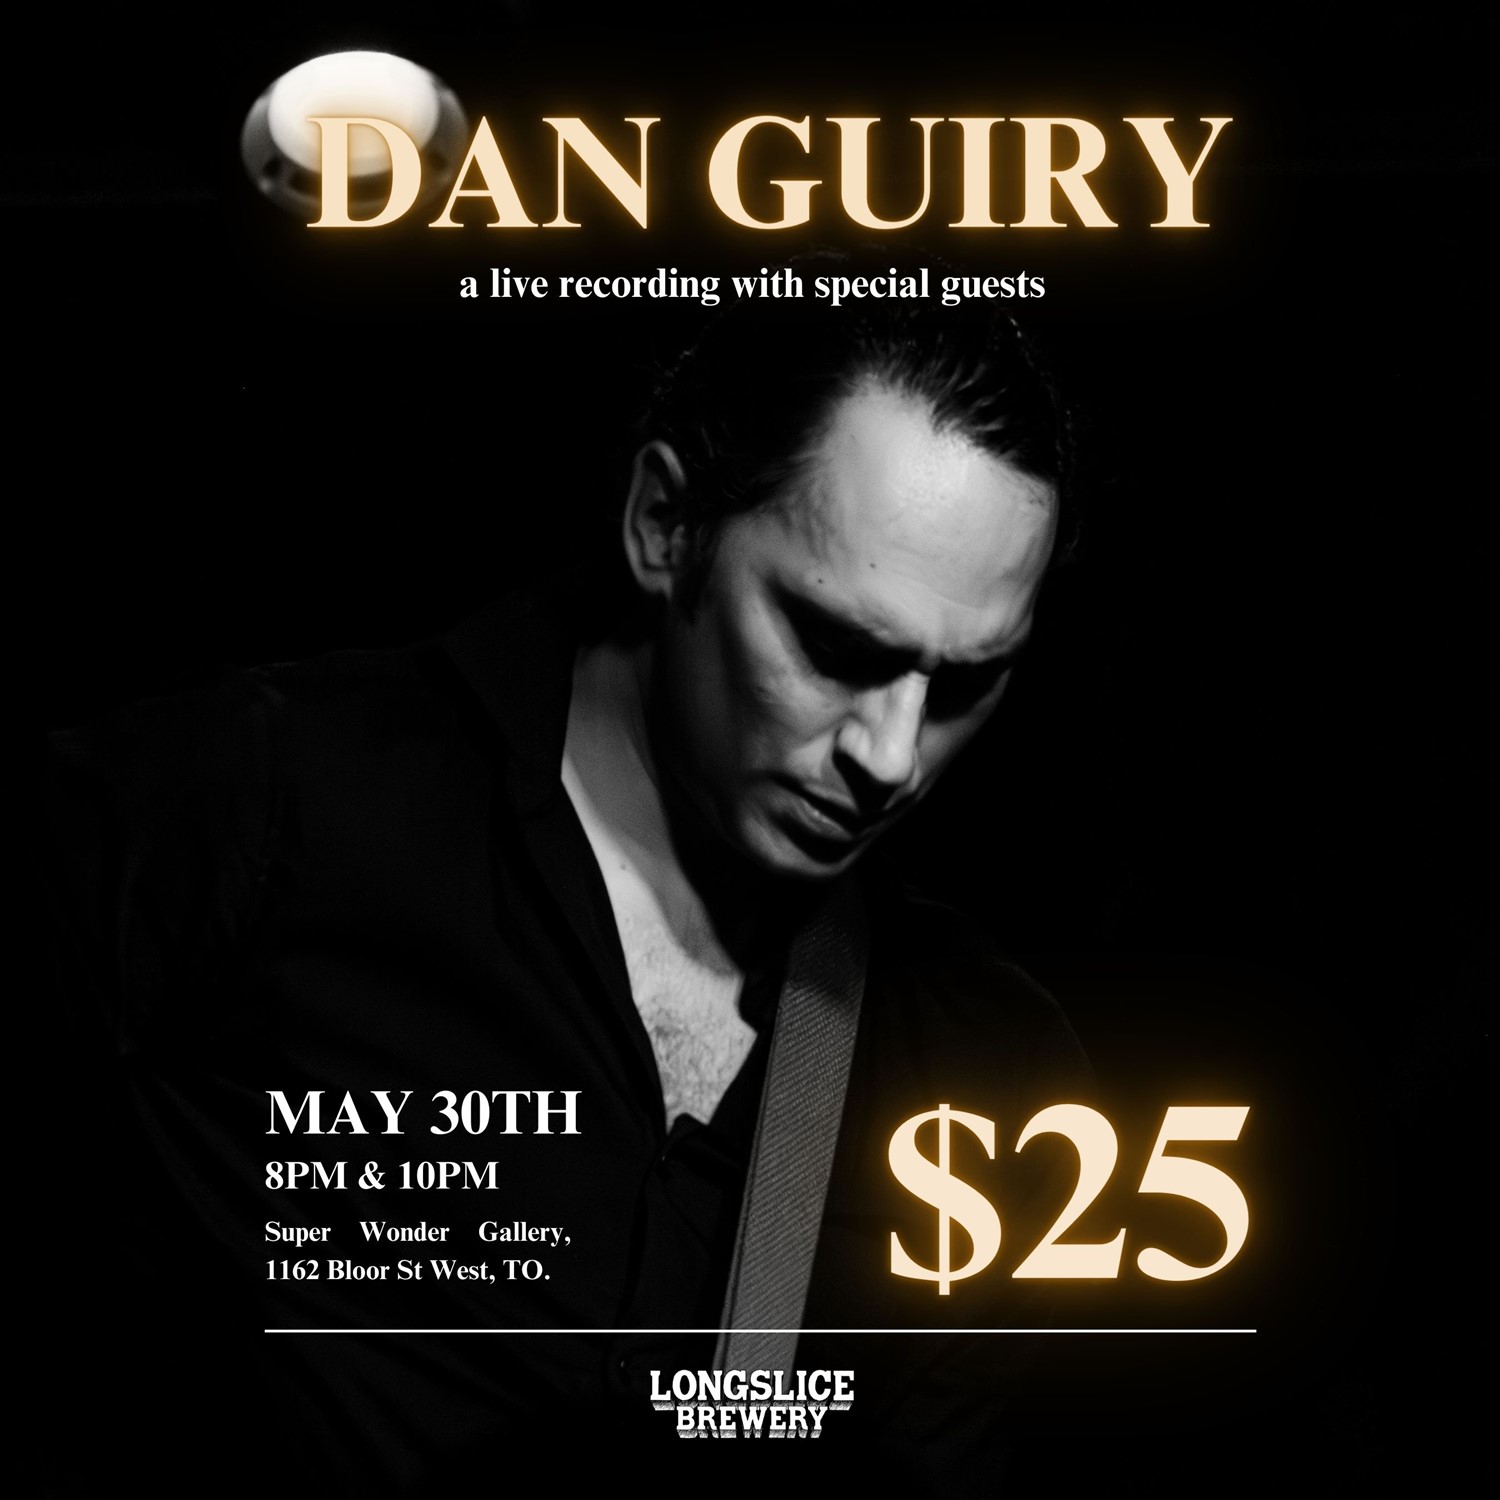 DAN GUIRY COMEDY SPECIAL 8pm on May 30, 20:00@SUPER WONDER GALLERY - Buy tickets and Get information on Super Wonder Gallery 